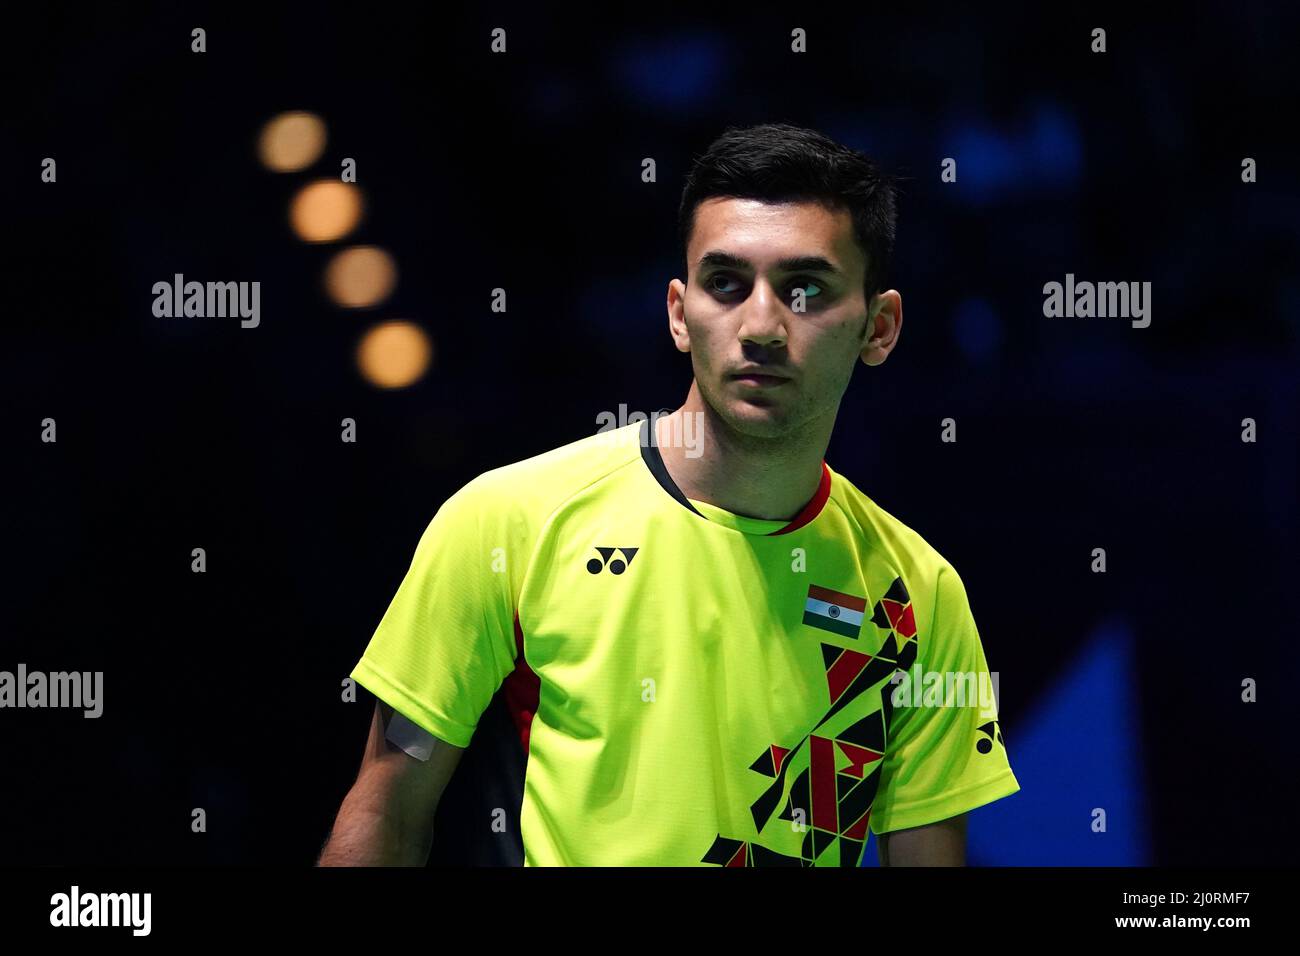 Indias Lakshya Sen in action against Denmarks Viktor Axelsen in the Mens Singles Final during day five of the YONEX All England Open Badminton Championships at the Utilita Arena Birmingham